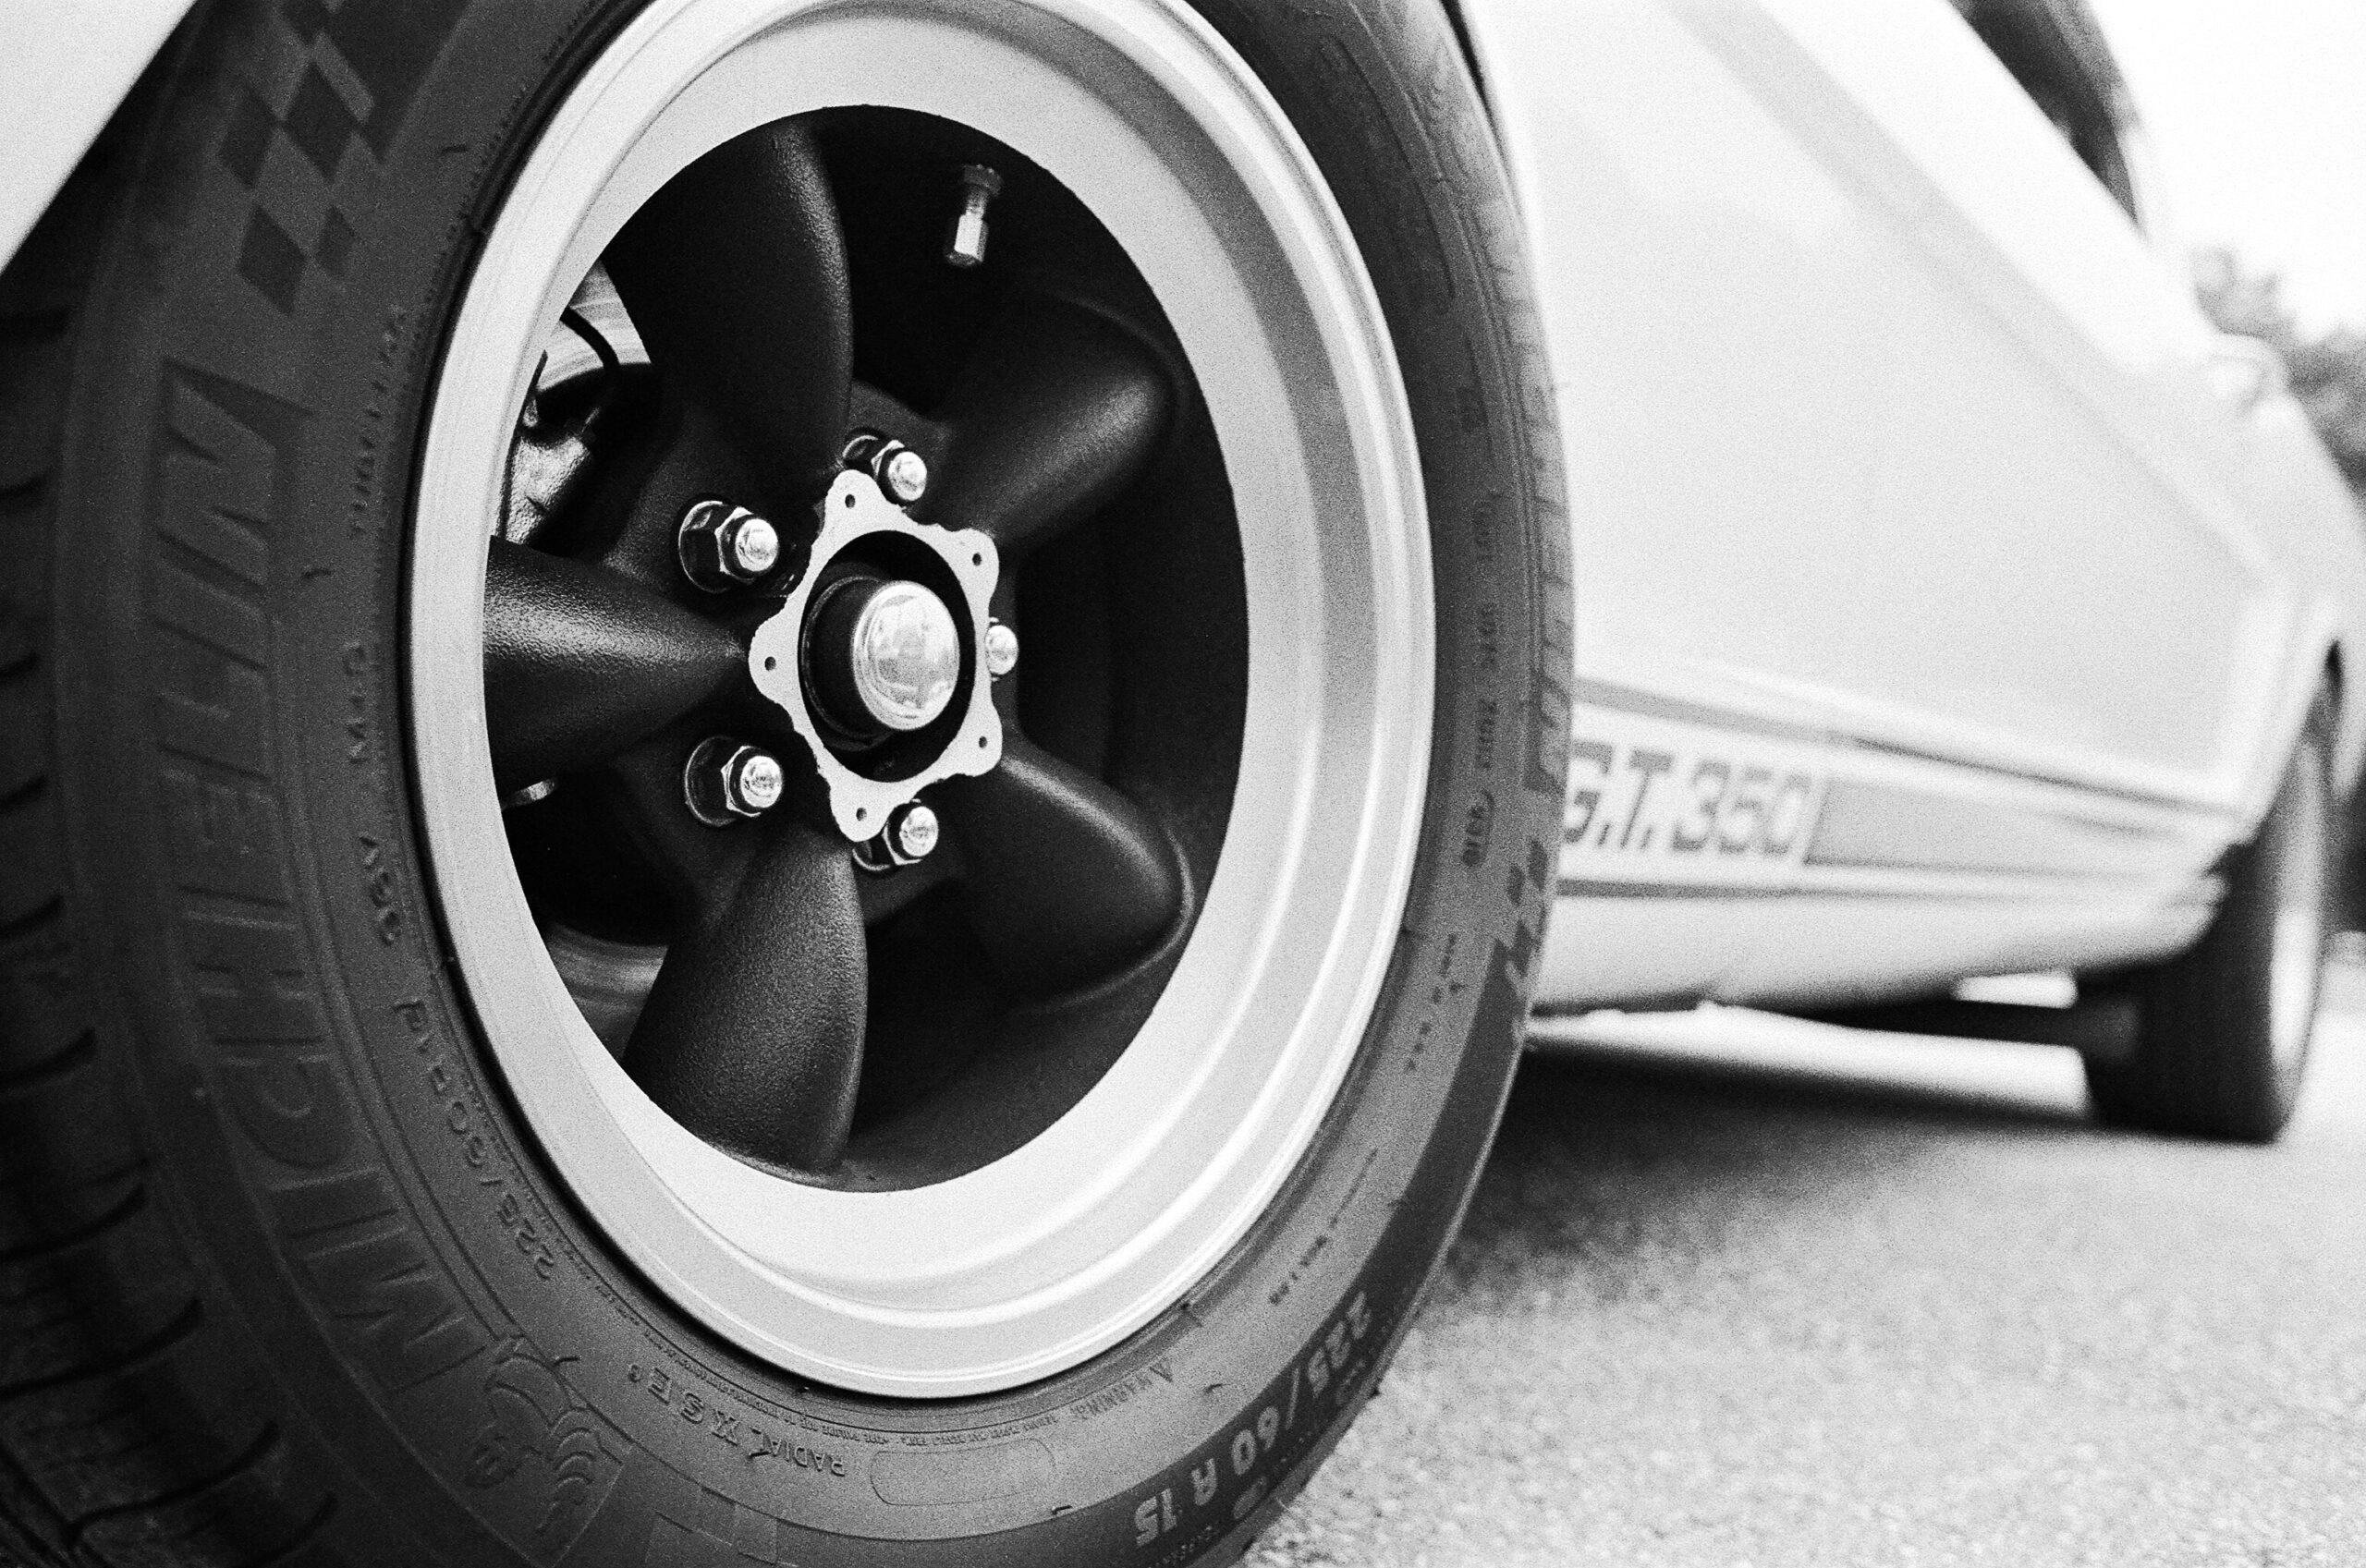 1965 Shelby GT350 wheel and tire